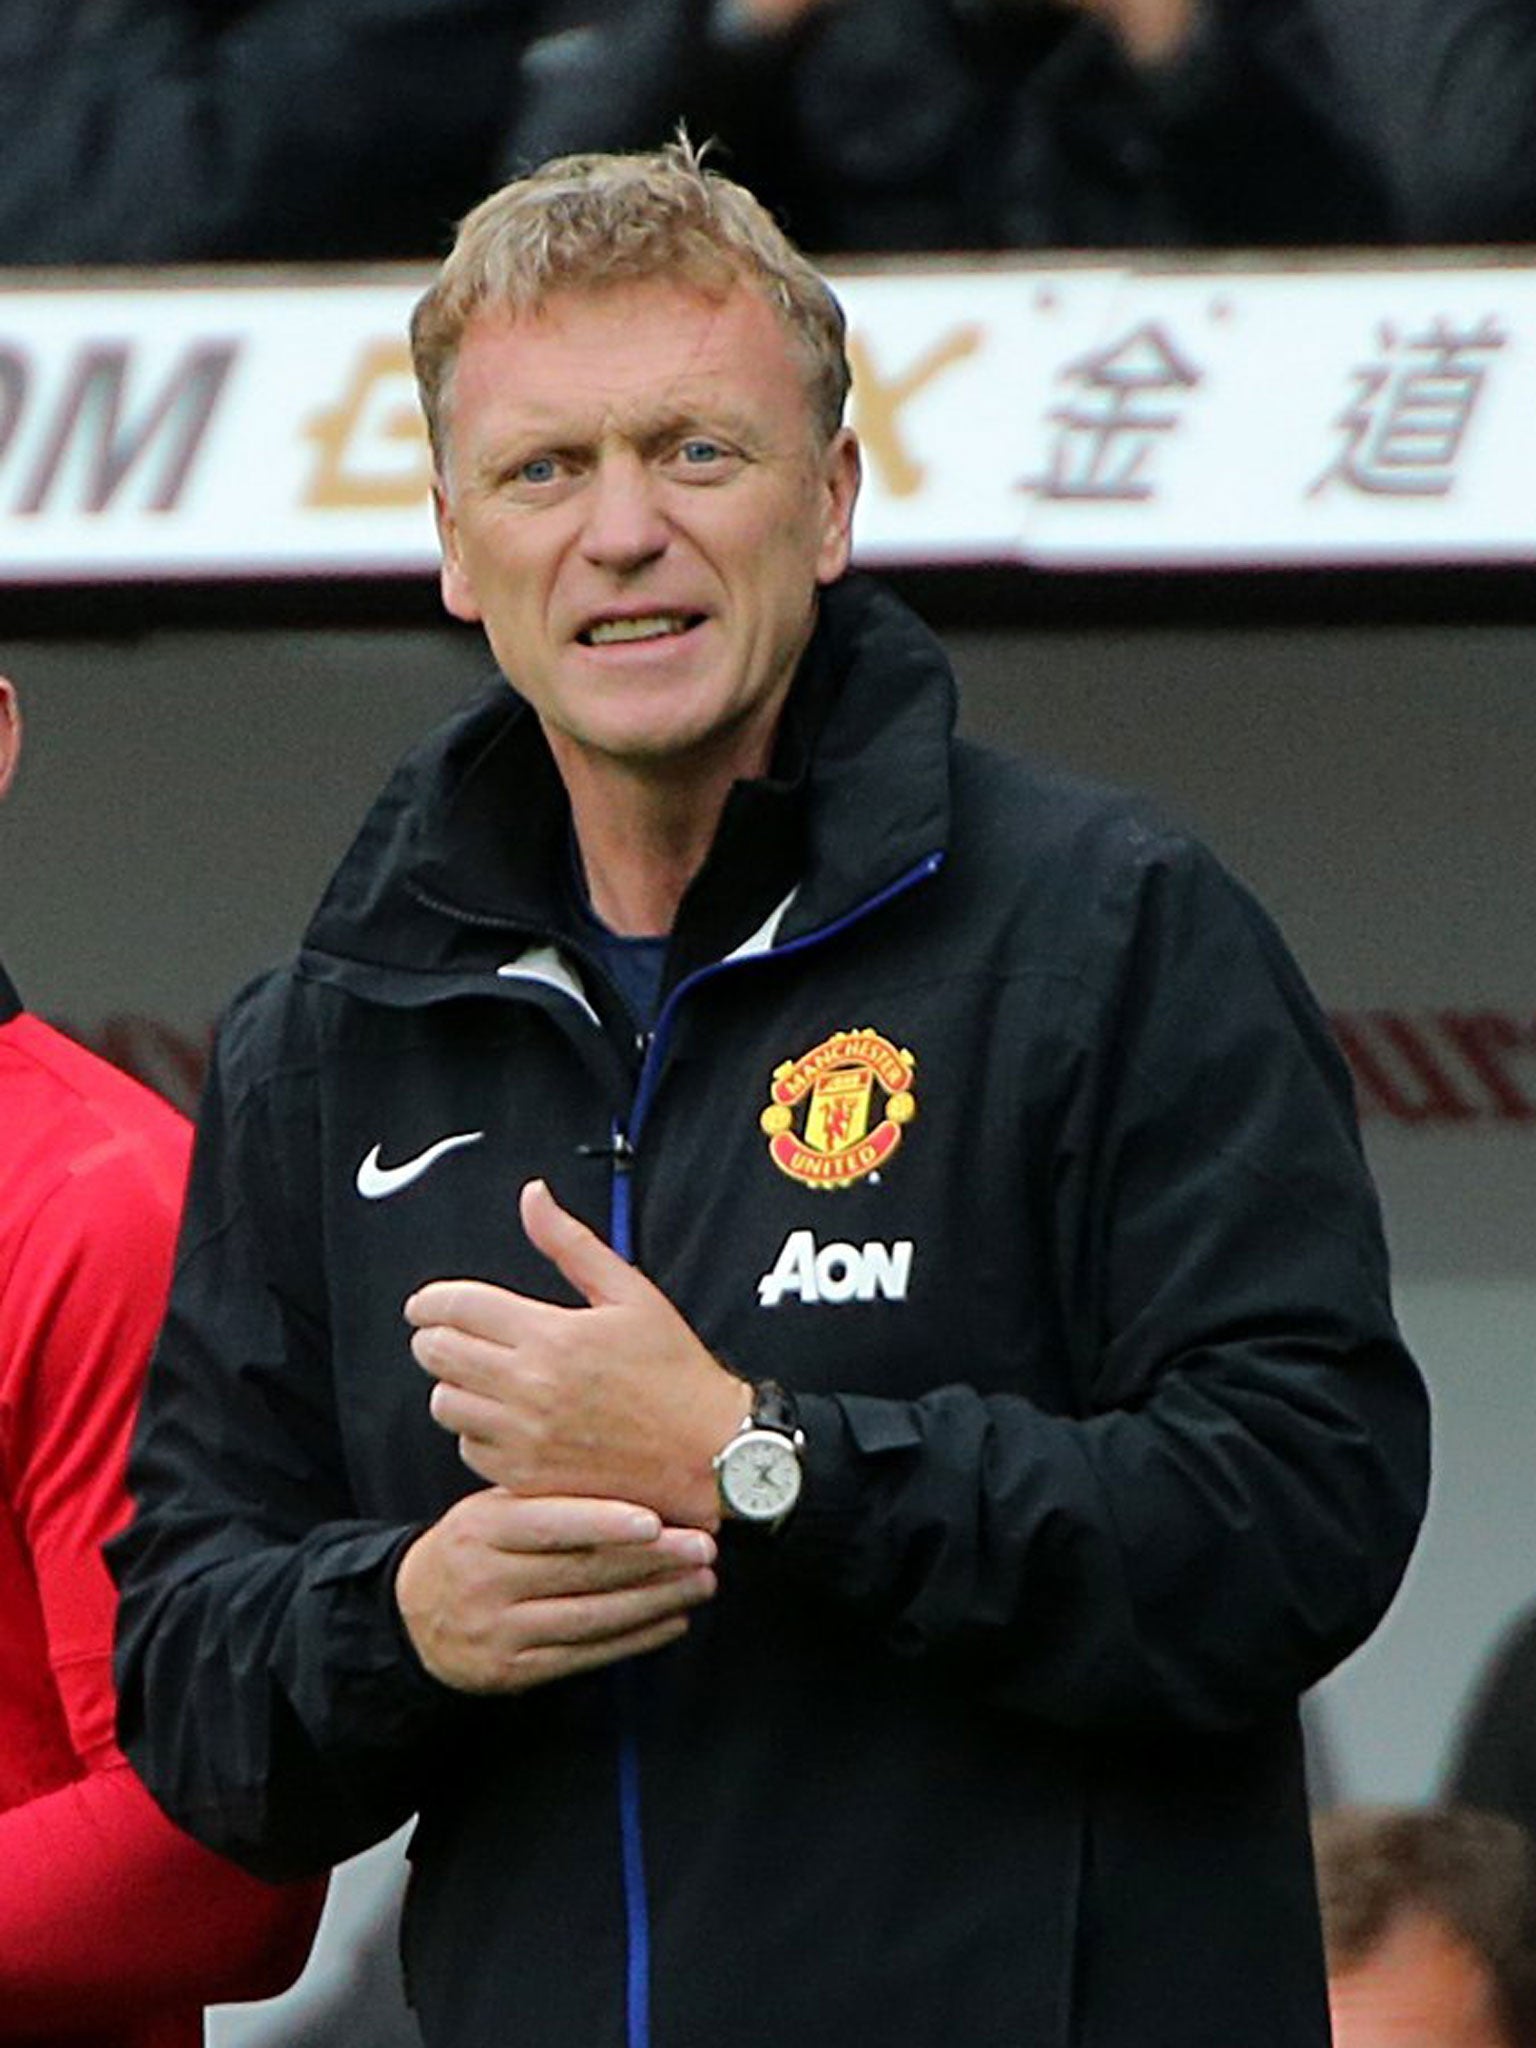 David Moyes is clever at changing tactics mid-game, says Pat Nevin